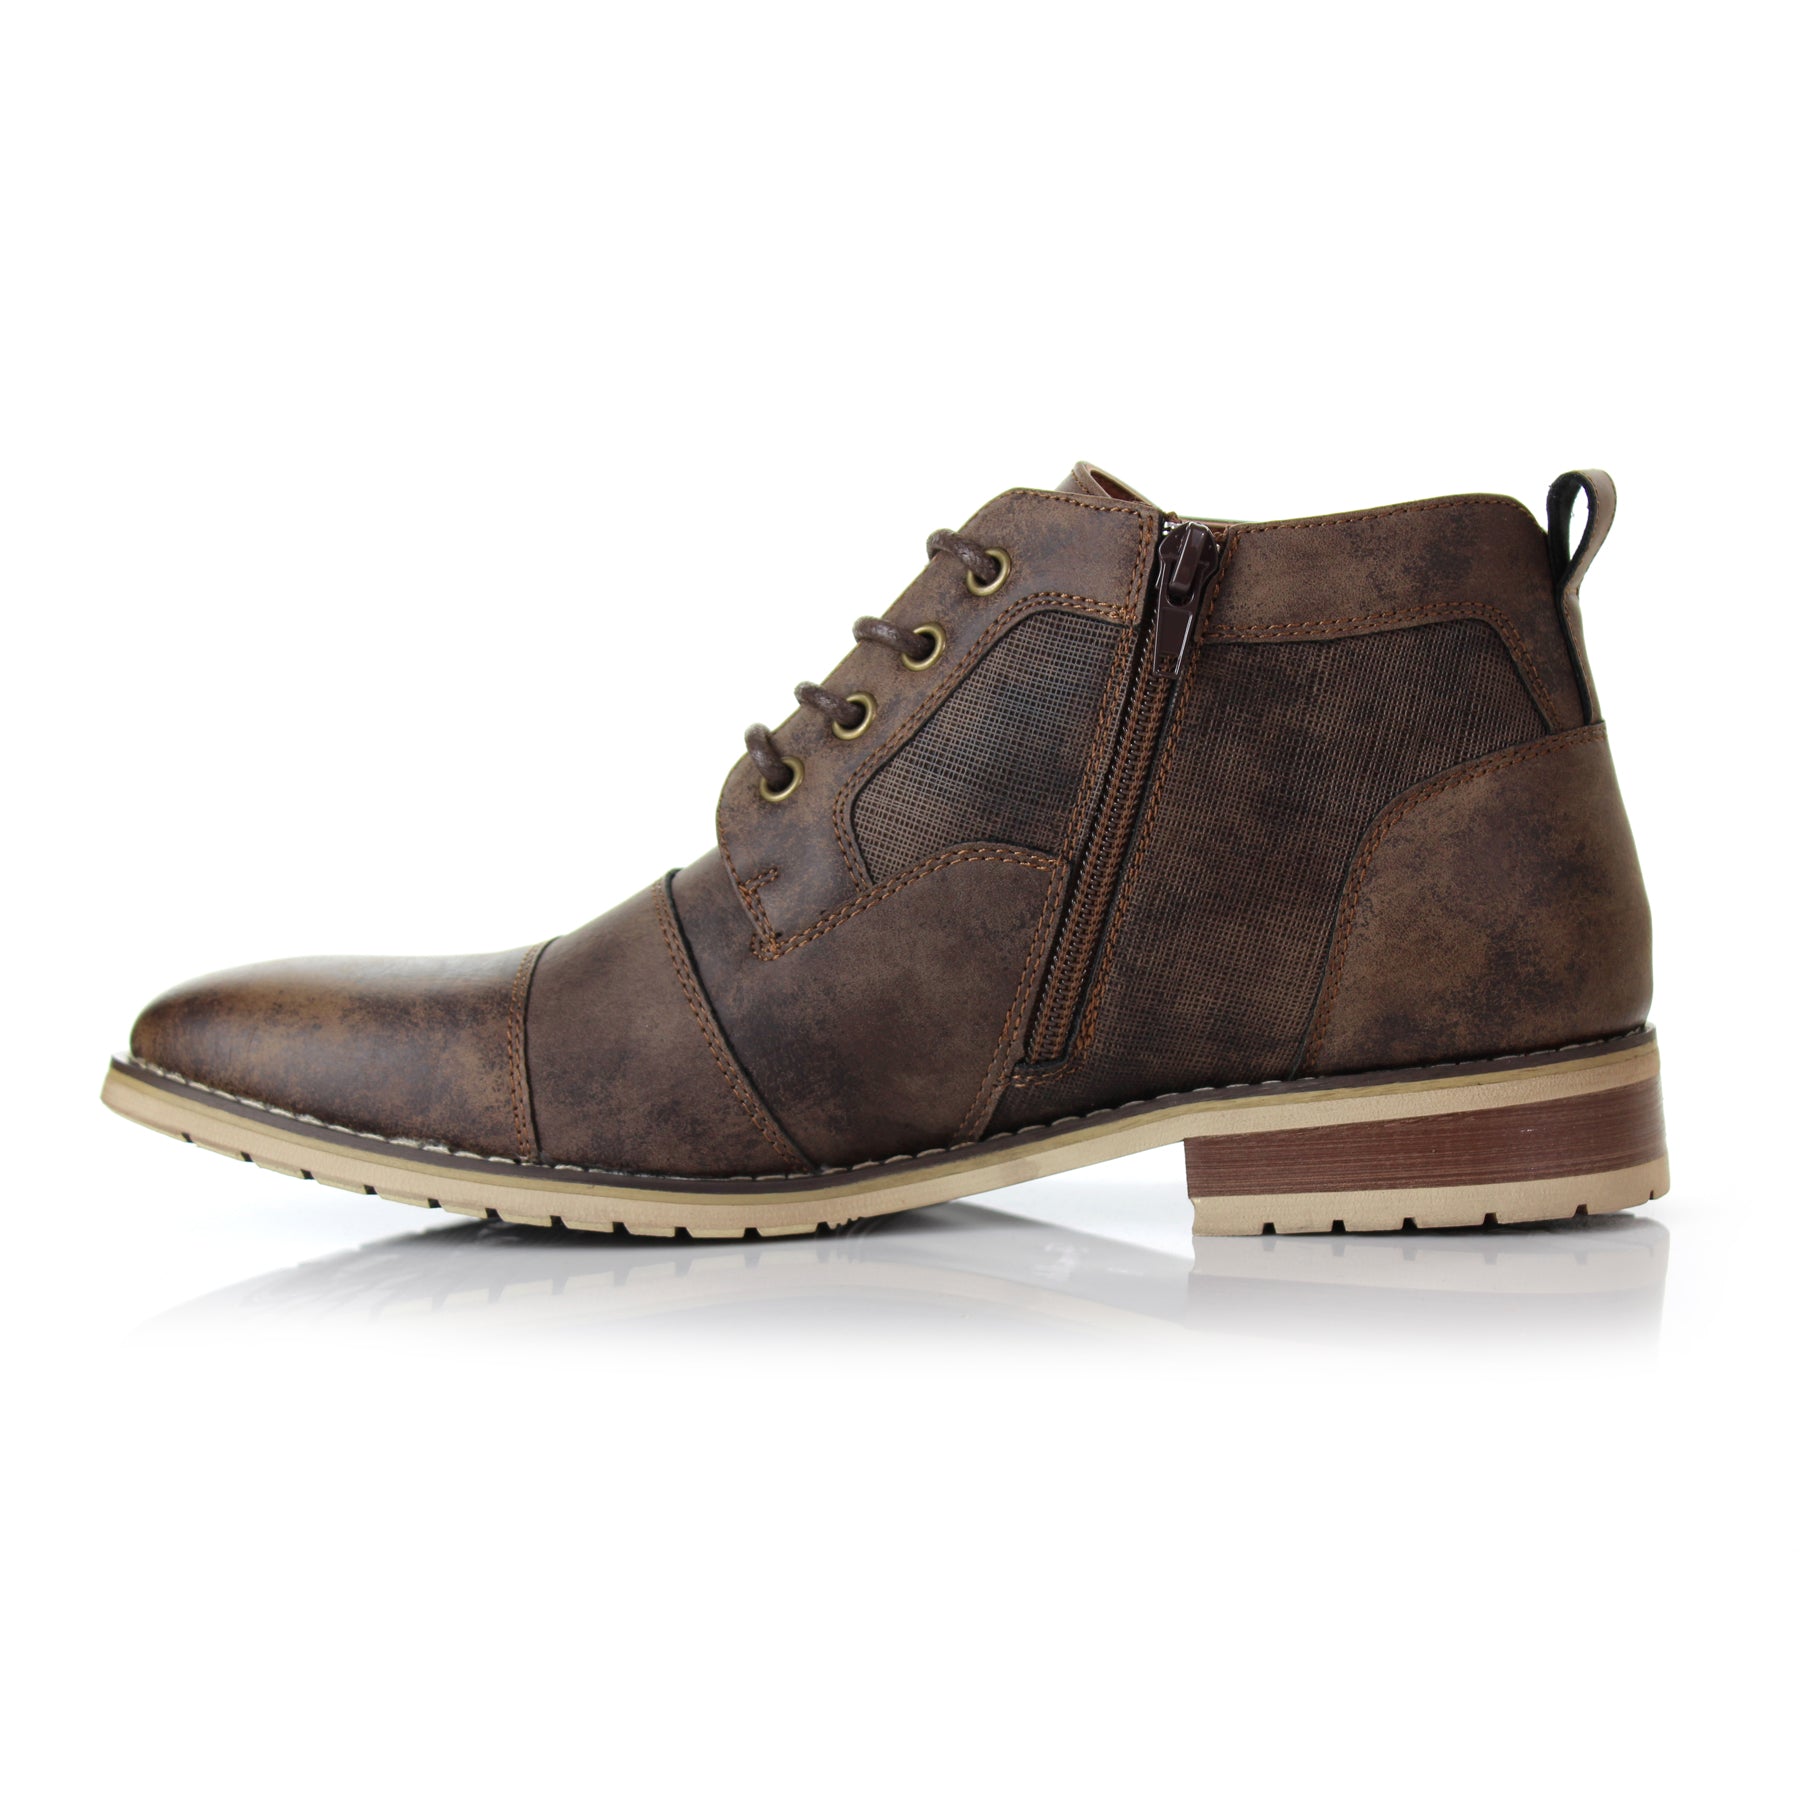 Mid-Top Zipper Boots | Blaine by Ferro Aldo | Conal Footwear | Outer Side Angle View